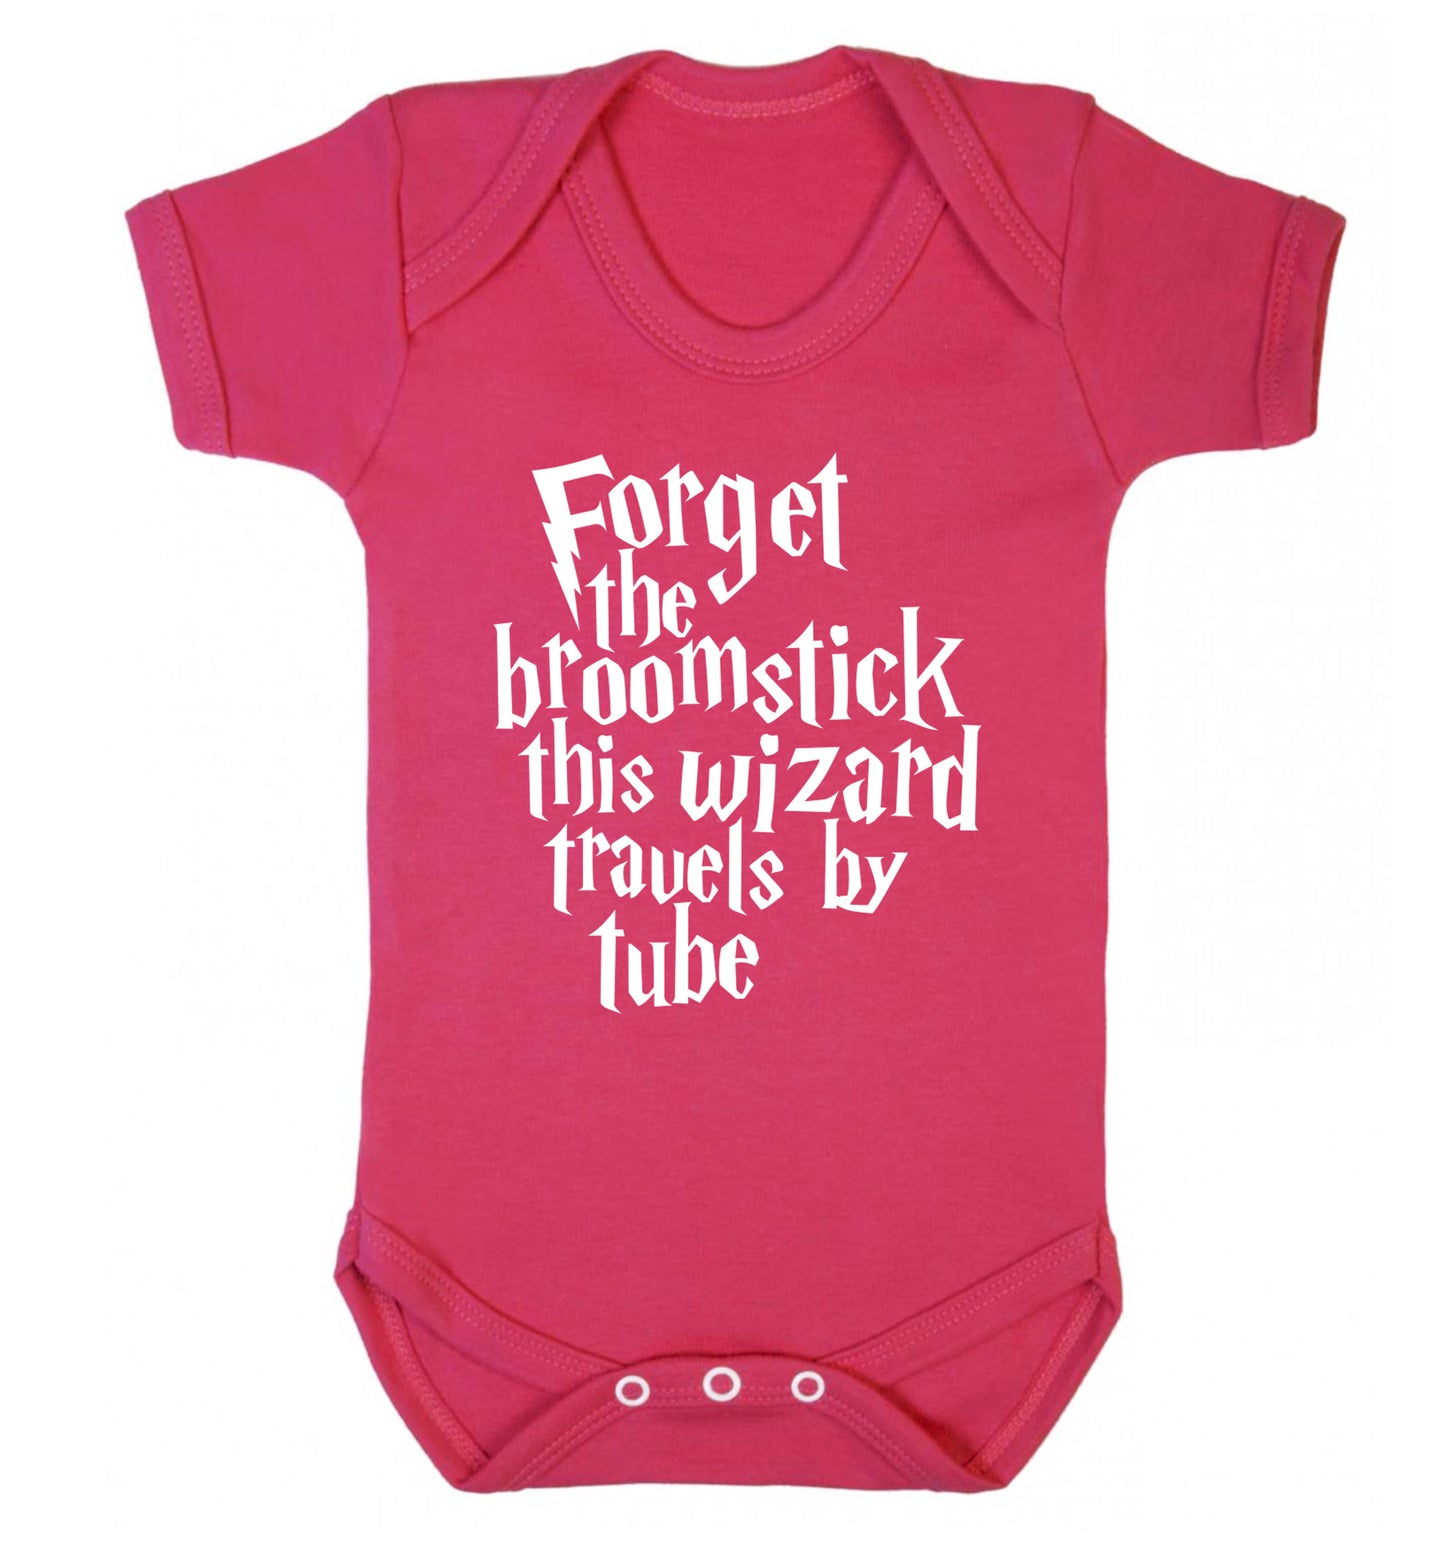 Forget the broomstick this wizard travels by tube Baby Vest dark pink 18-24 months